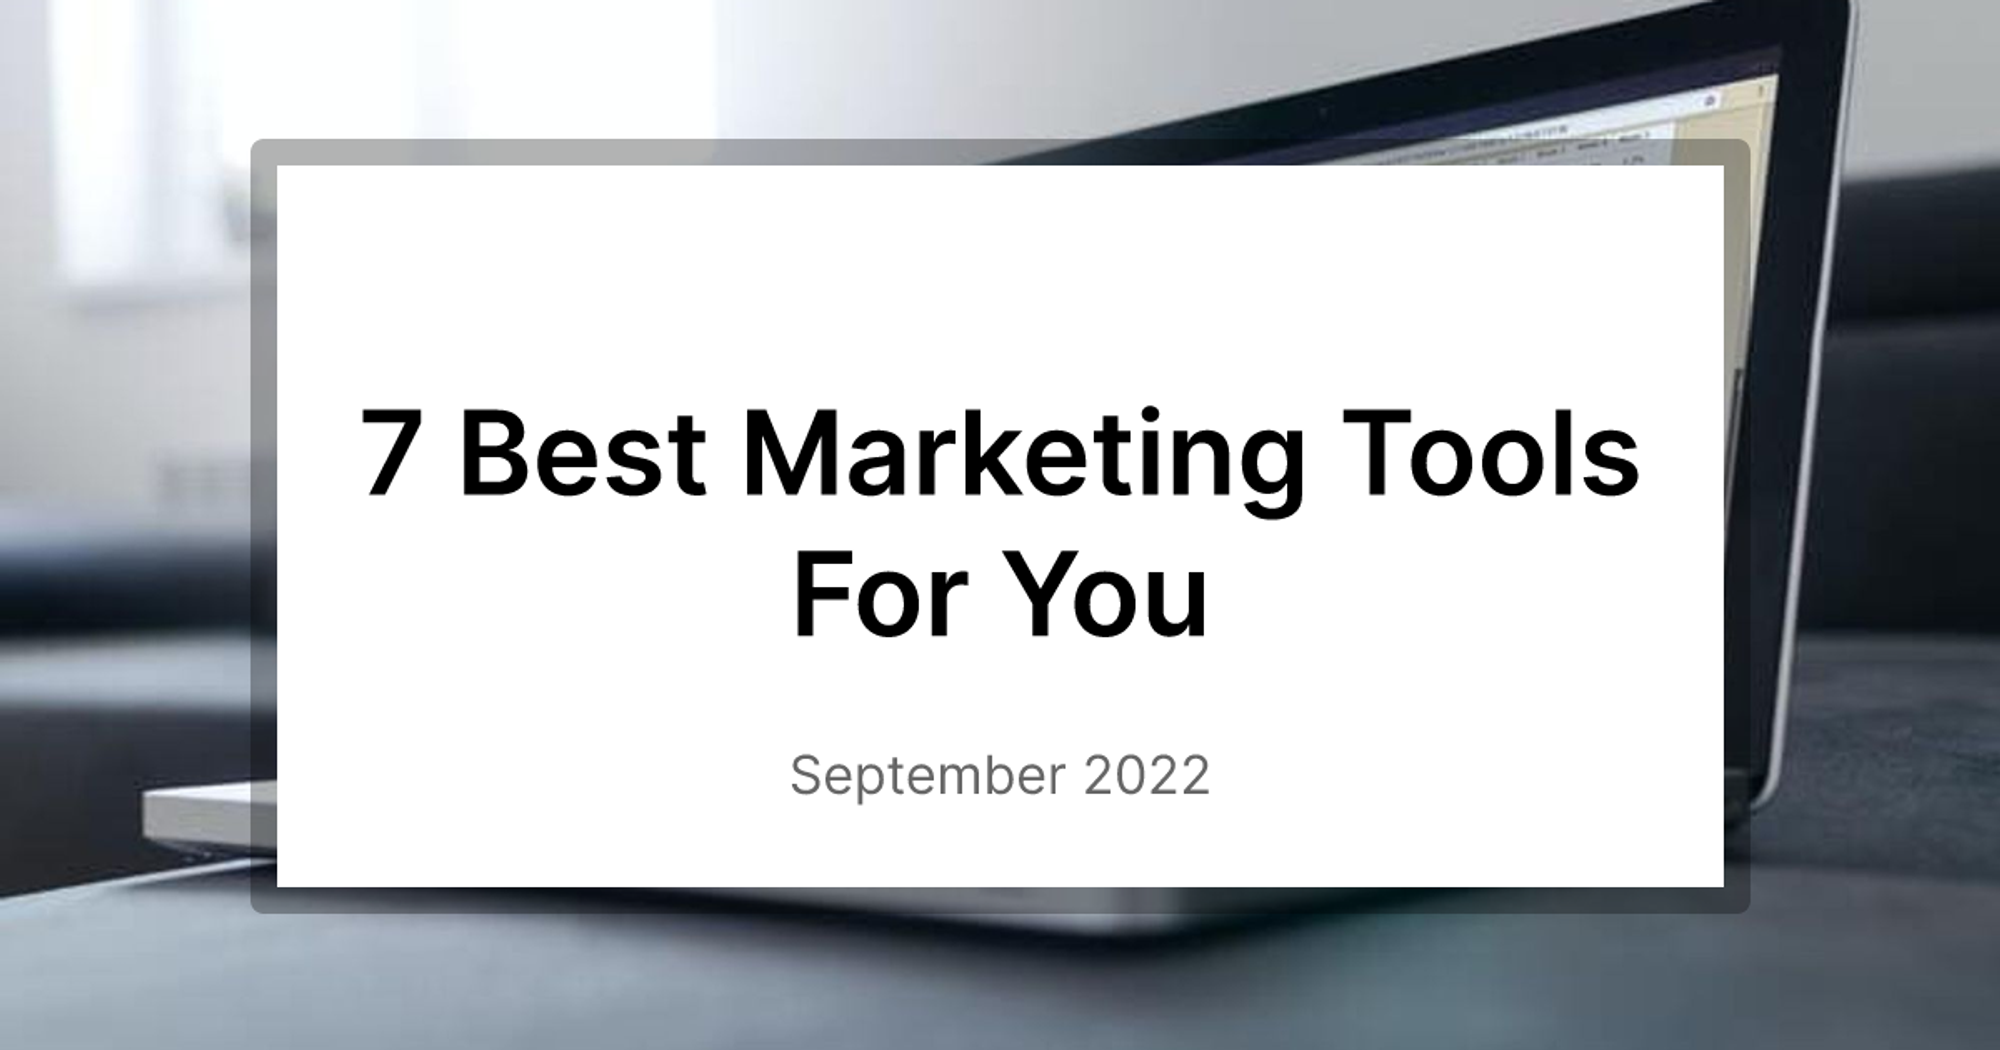 7 Best Marketing Tools For You